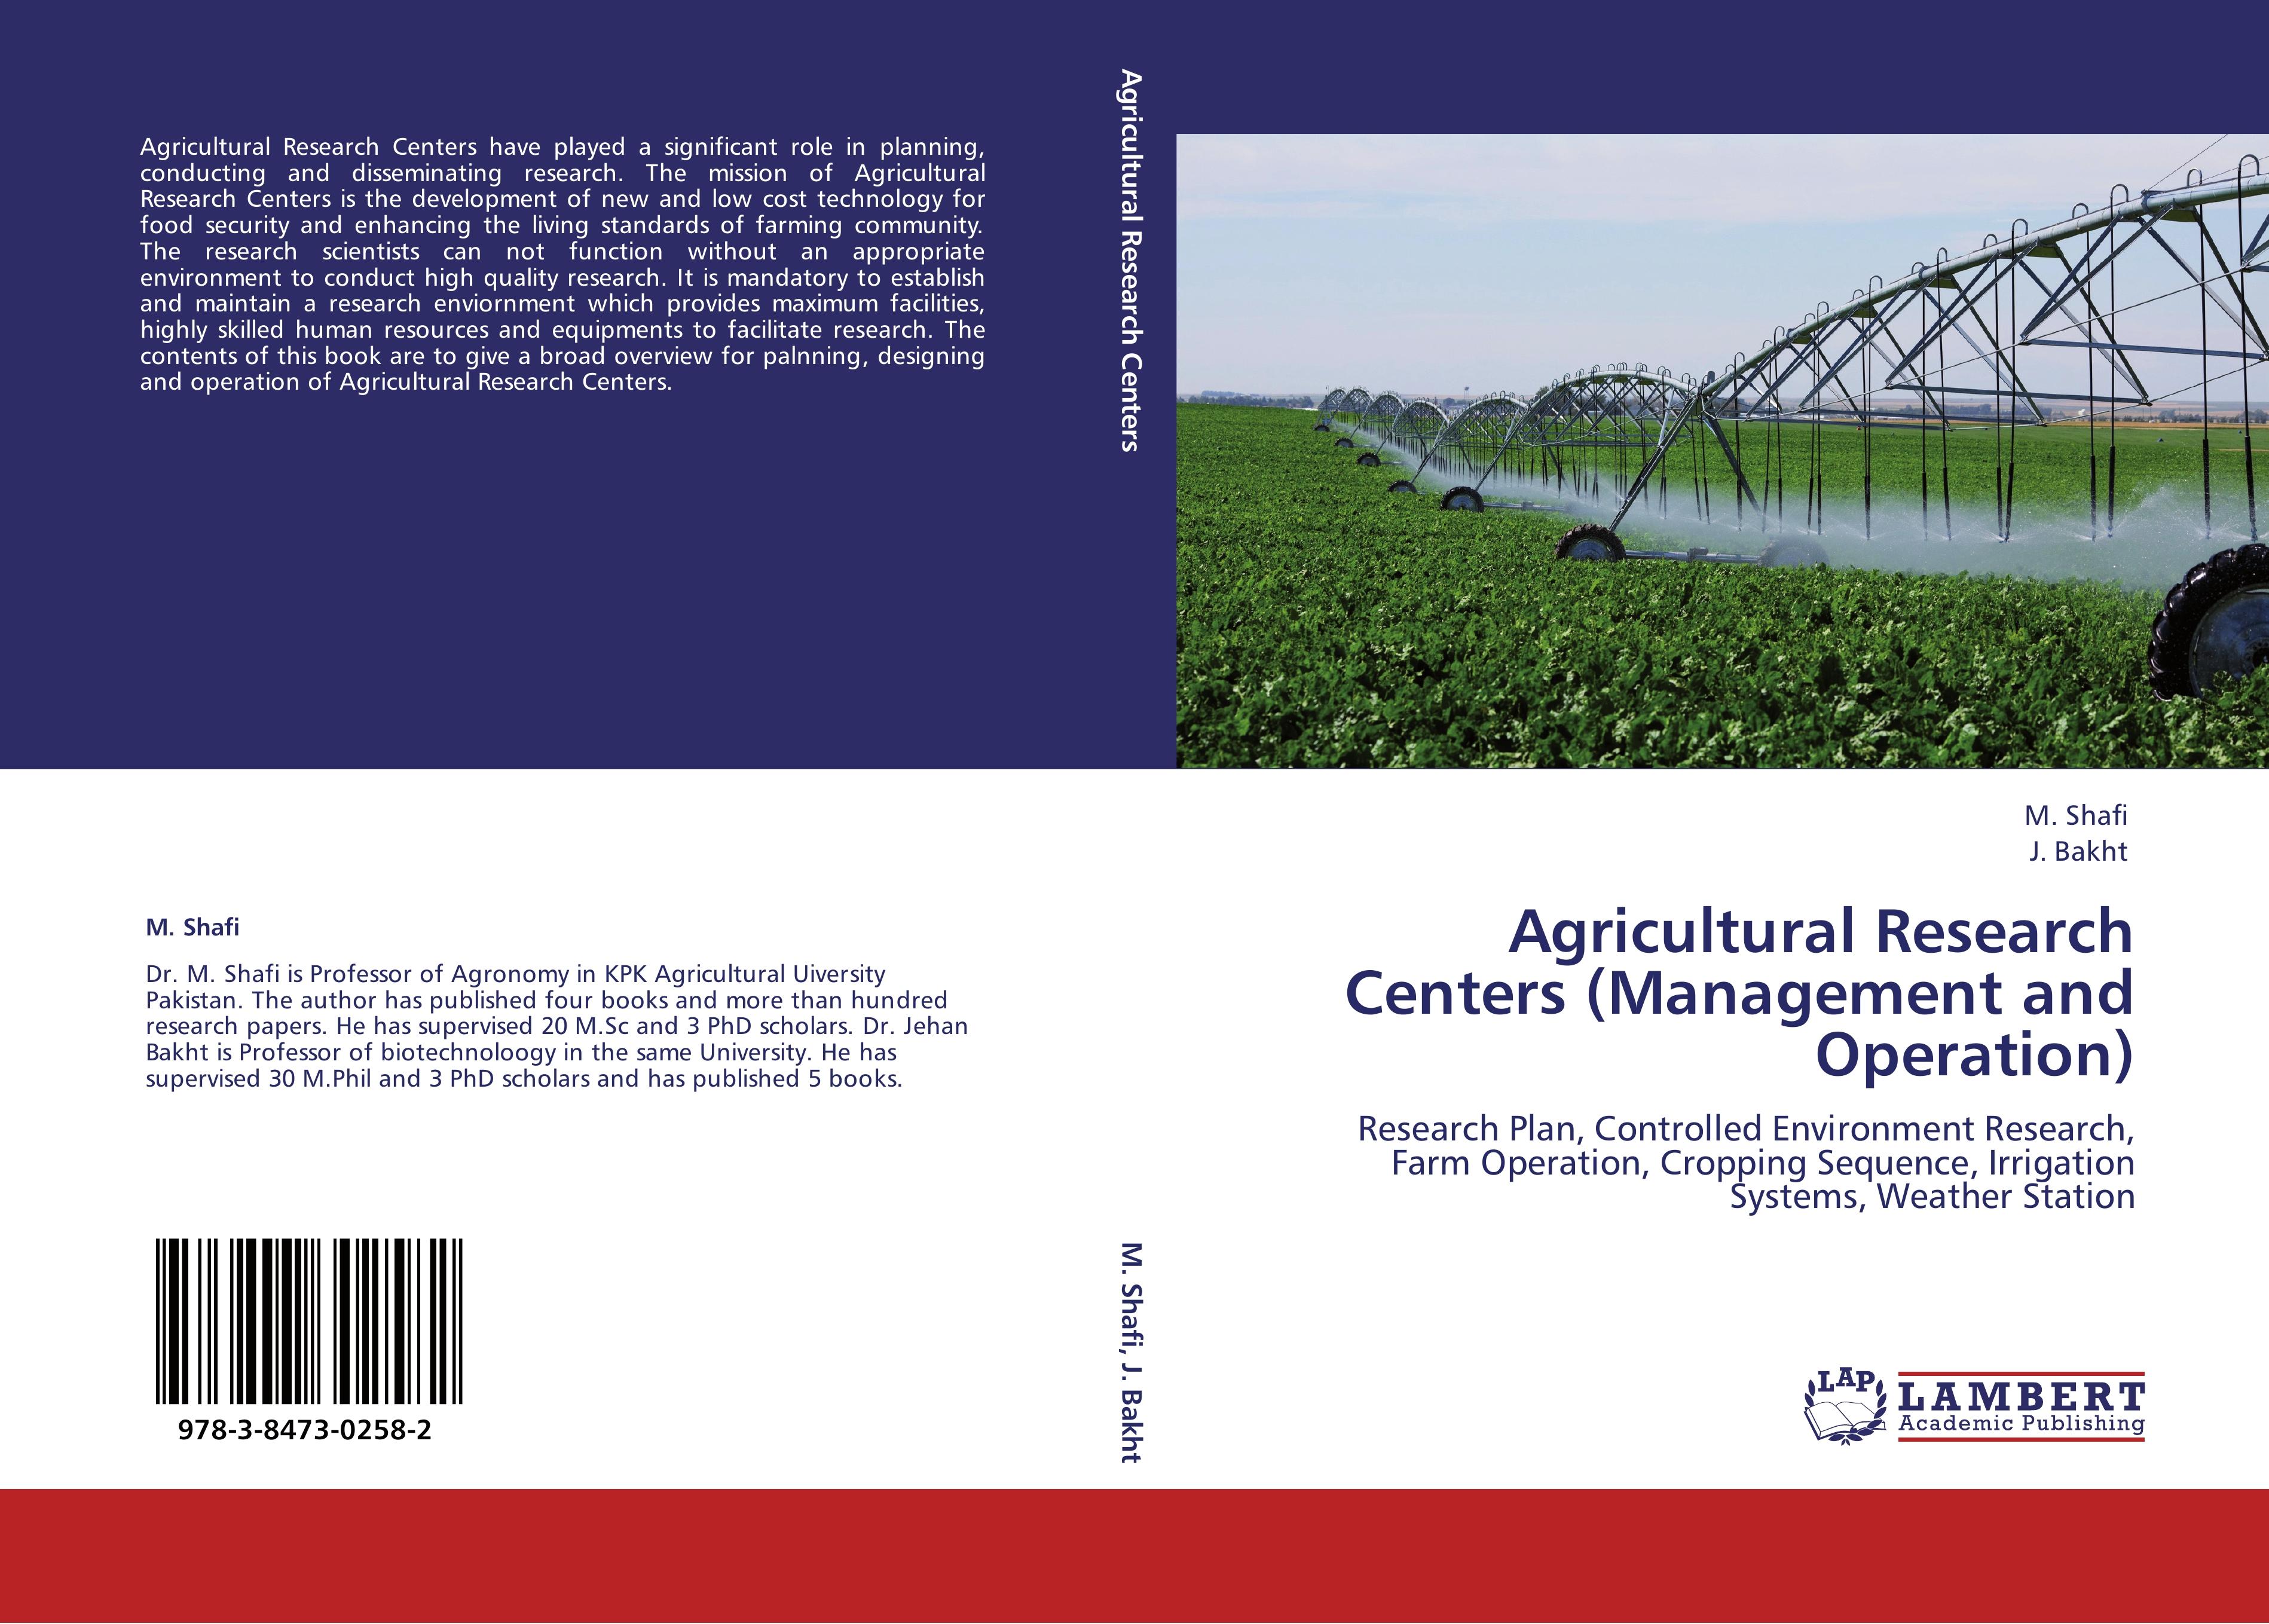 Agricultural Research Centers (Management and Operation) - Shafi, M. Bakht, J.